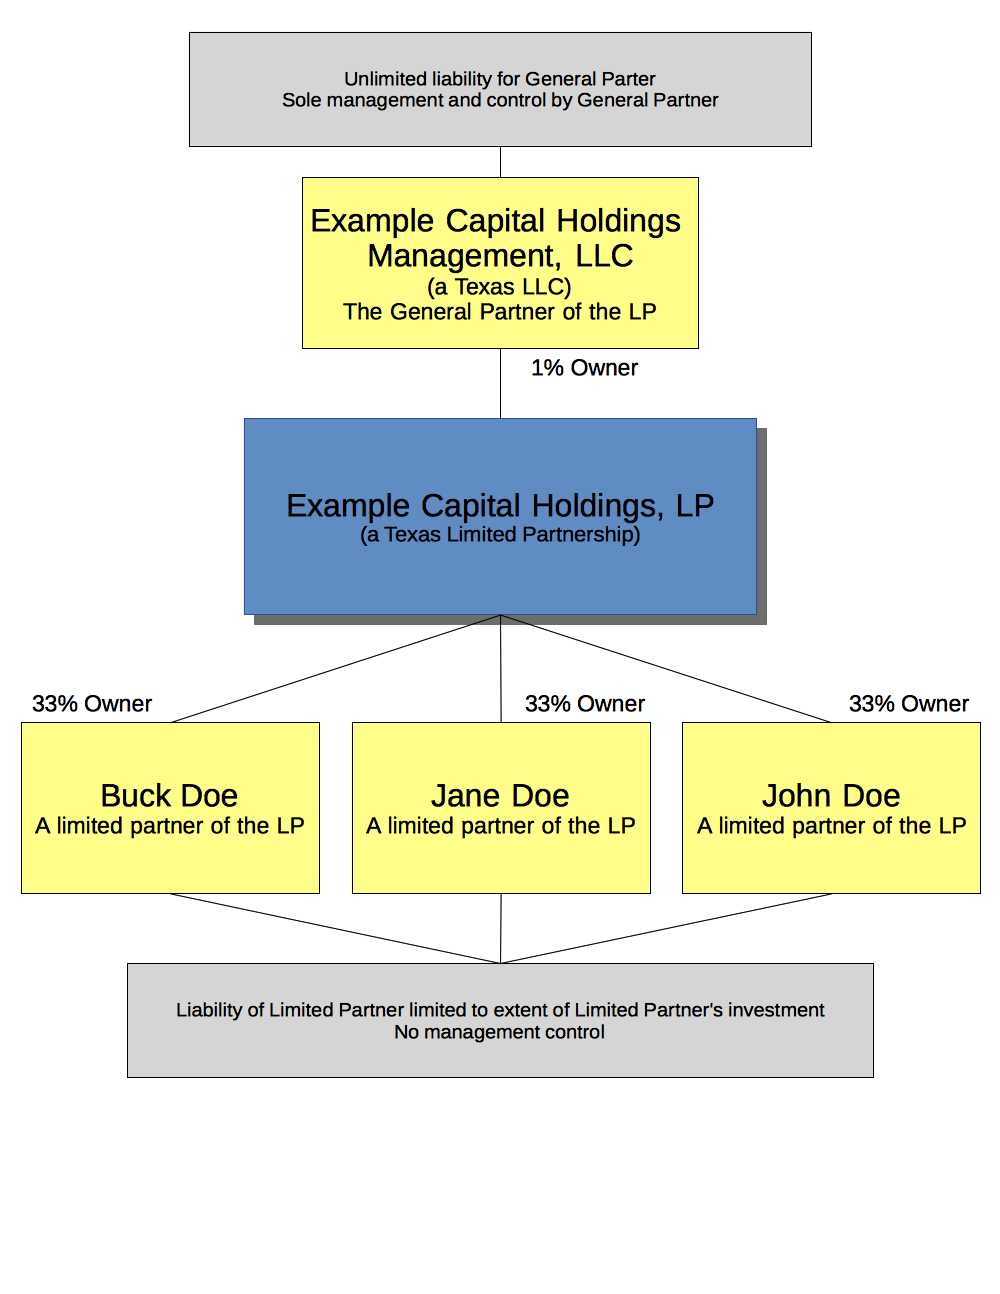 a diagram showing a Limited Partnership, with three natural persons as 33 percent limited partners each, and an LLC owning 1 percent as the general partner